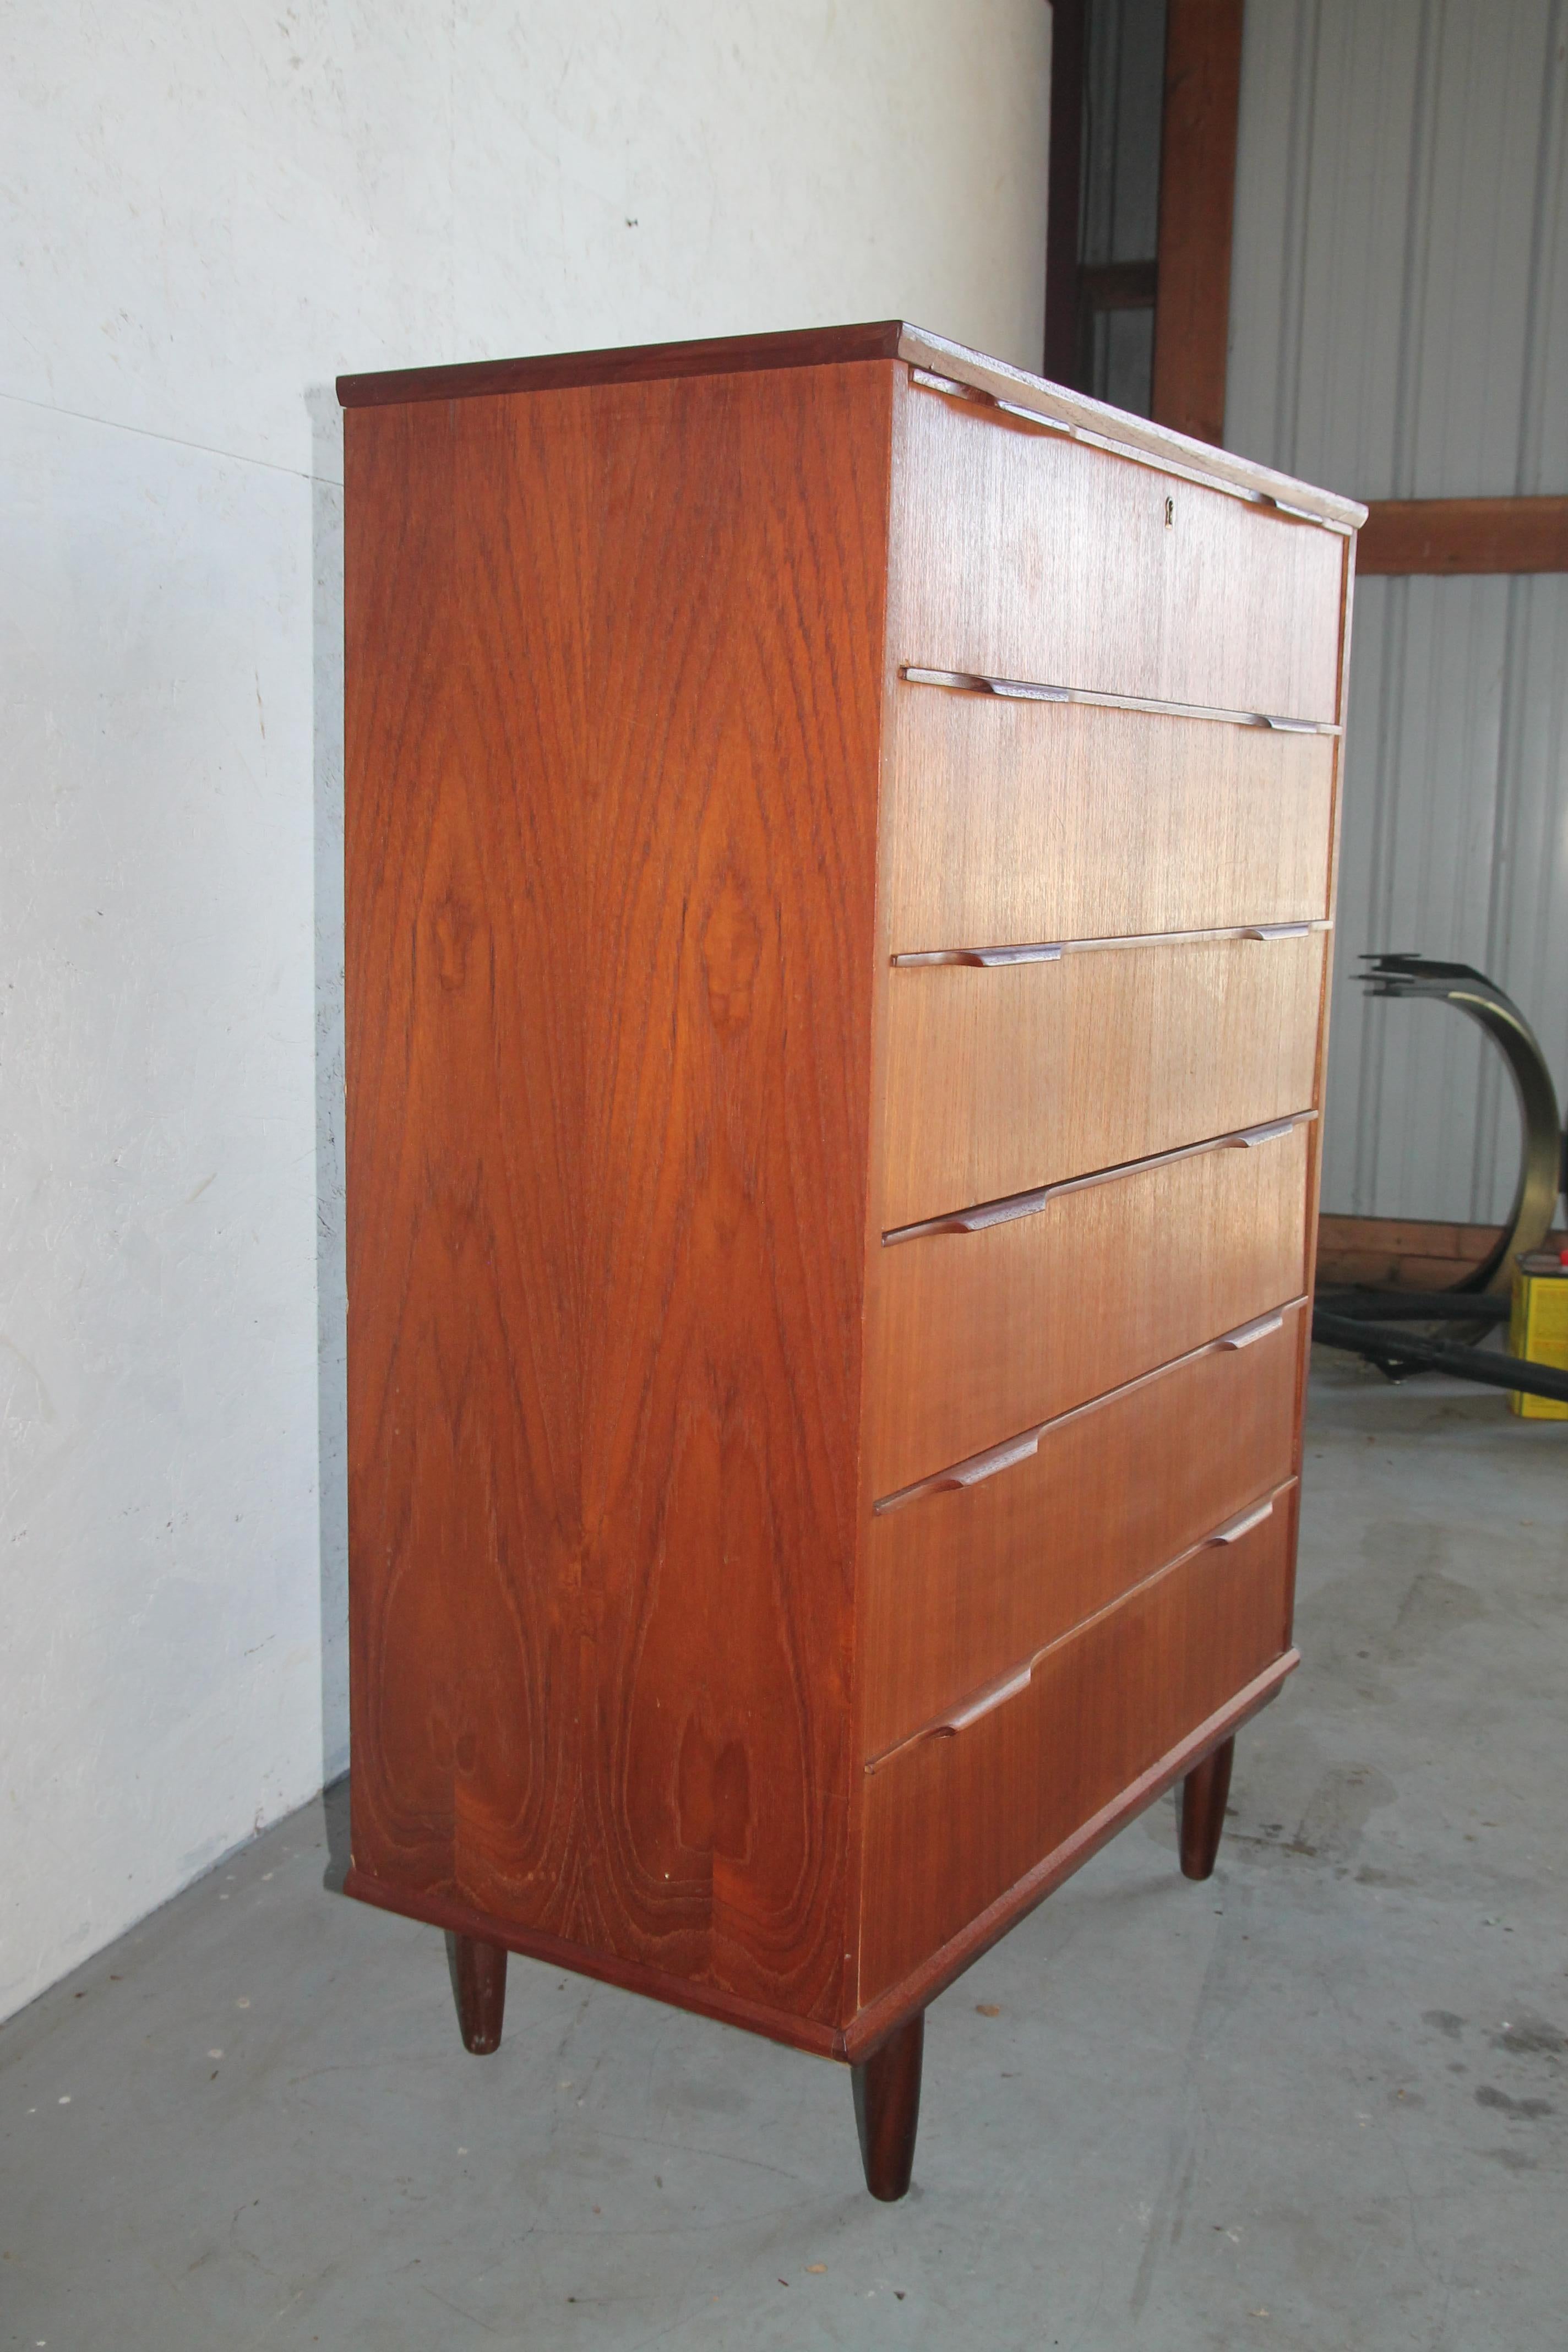 Danish 6 Draws Dresser In Good Condition For Sale In Asbury Park, NJ